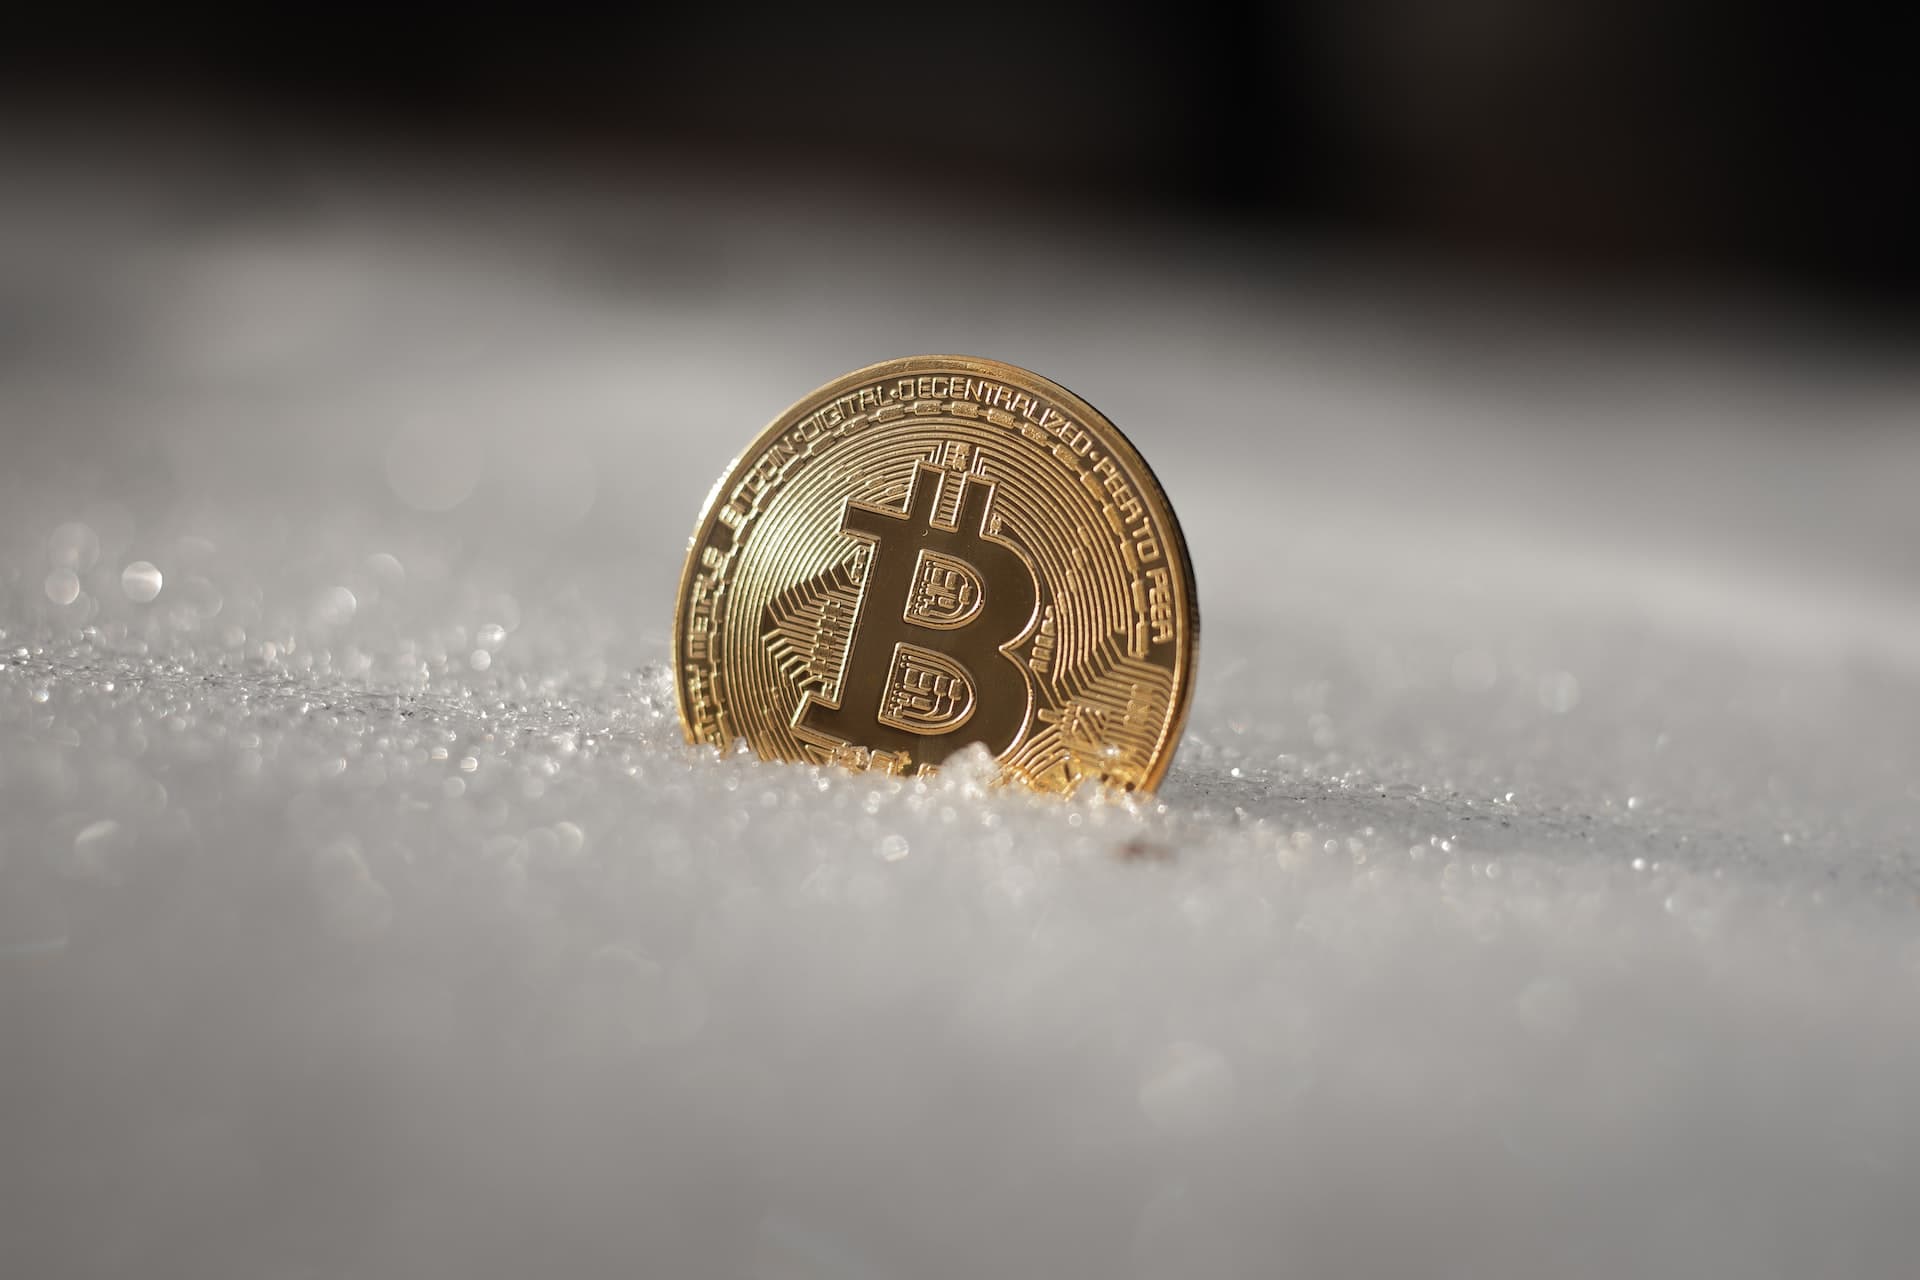 Crypto Winter is coming as cryptocurrency prices witness a downturn period